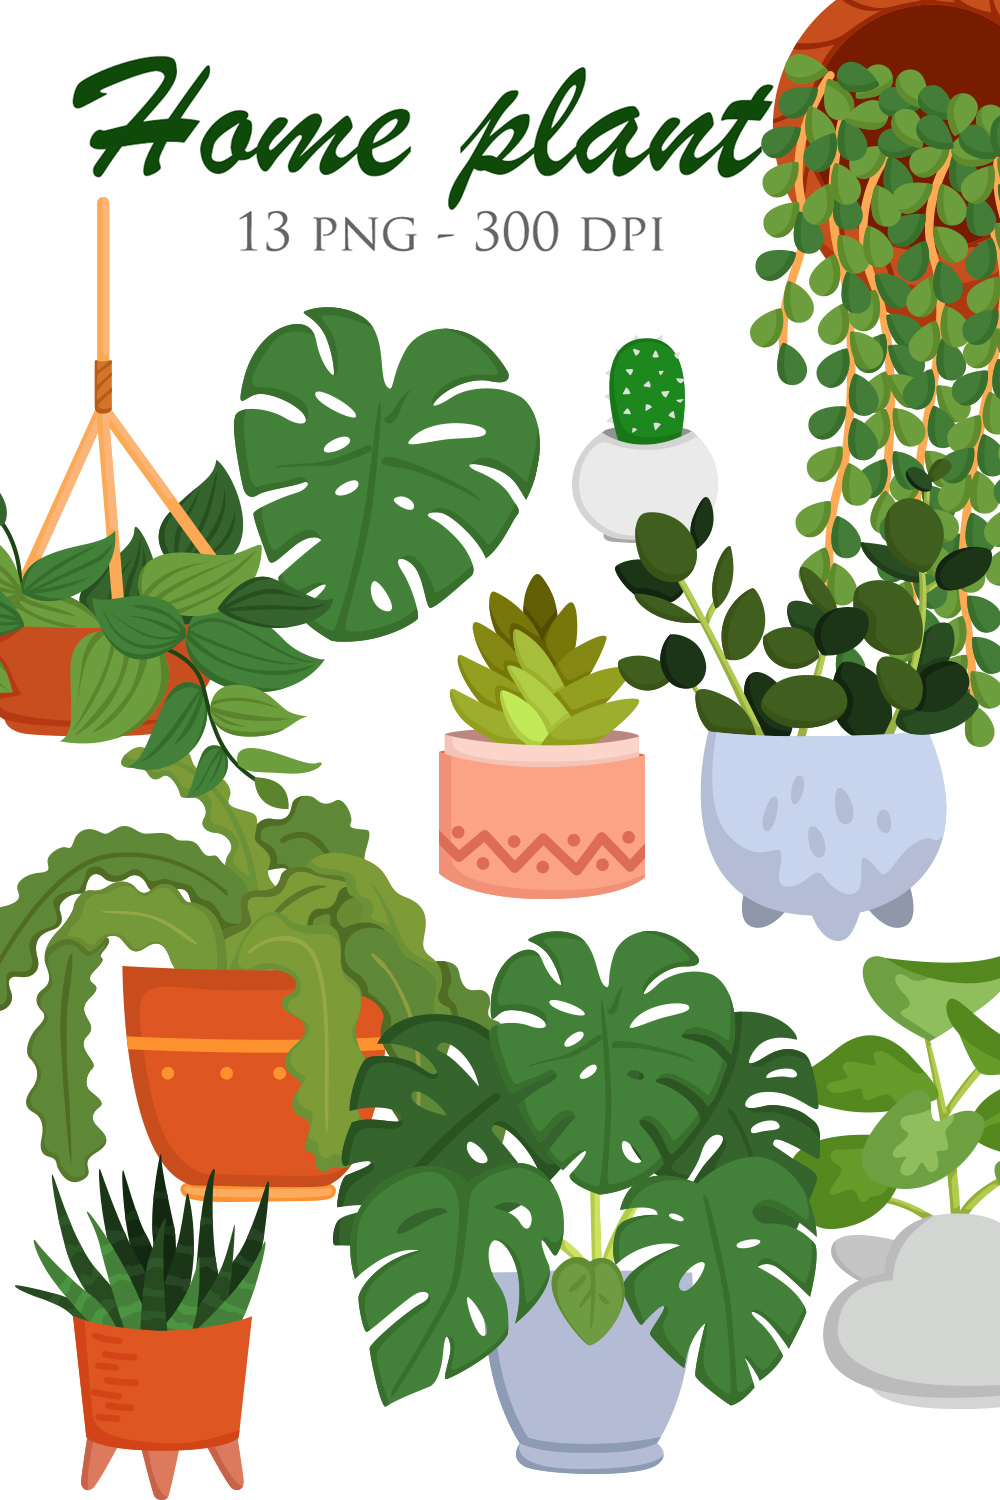 Kind Of Home Plants Leaves Indoor Nature Botanical Floral Cartoon Monstera Cactus Aloe Vera Peperomia Pothos Illustration Vector Clipart pinterest preview image.